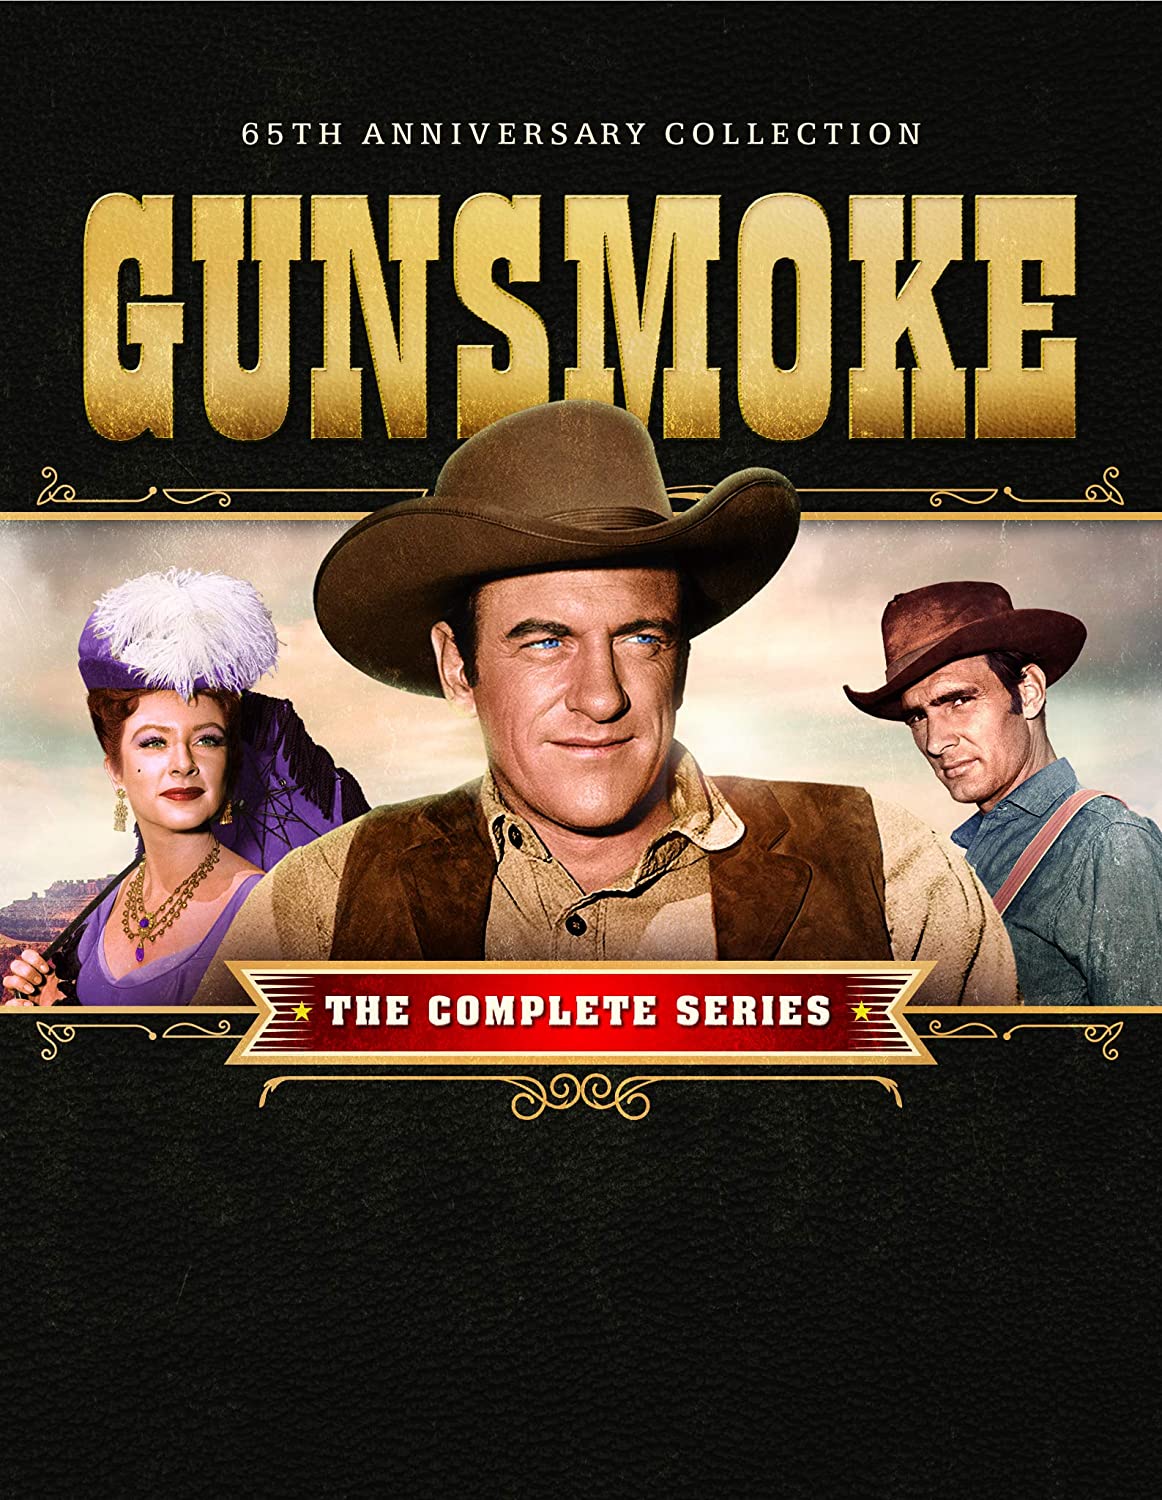 Gunsmoke Complete Series On DVD Paramount Home Entertainment DVDs & Blu-ray Discs